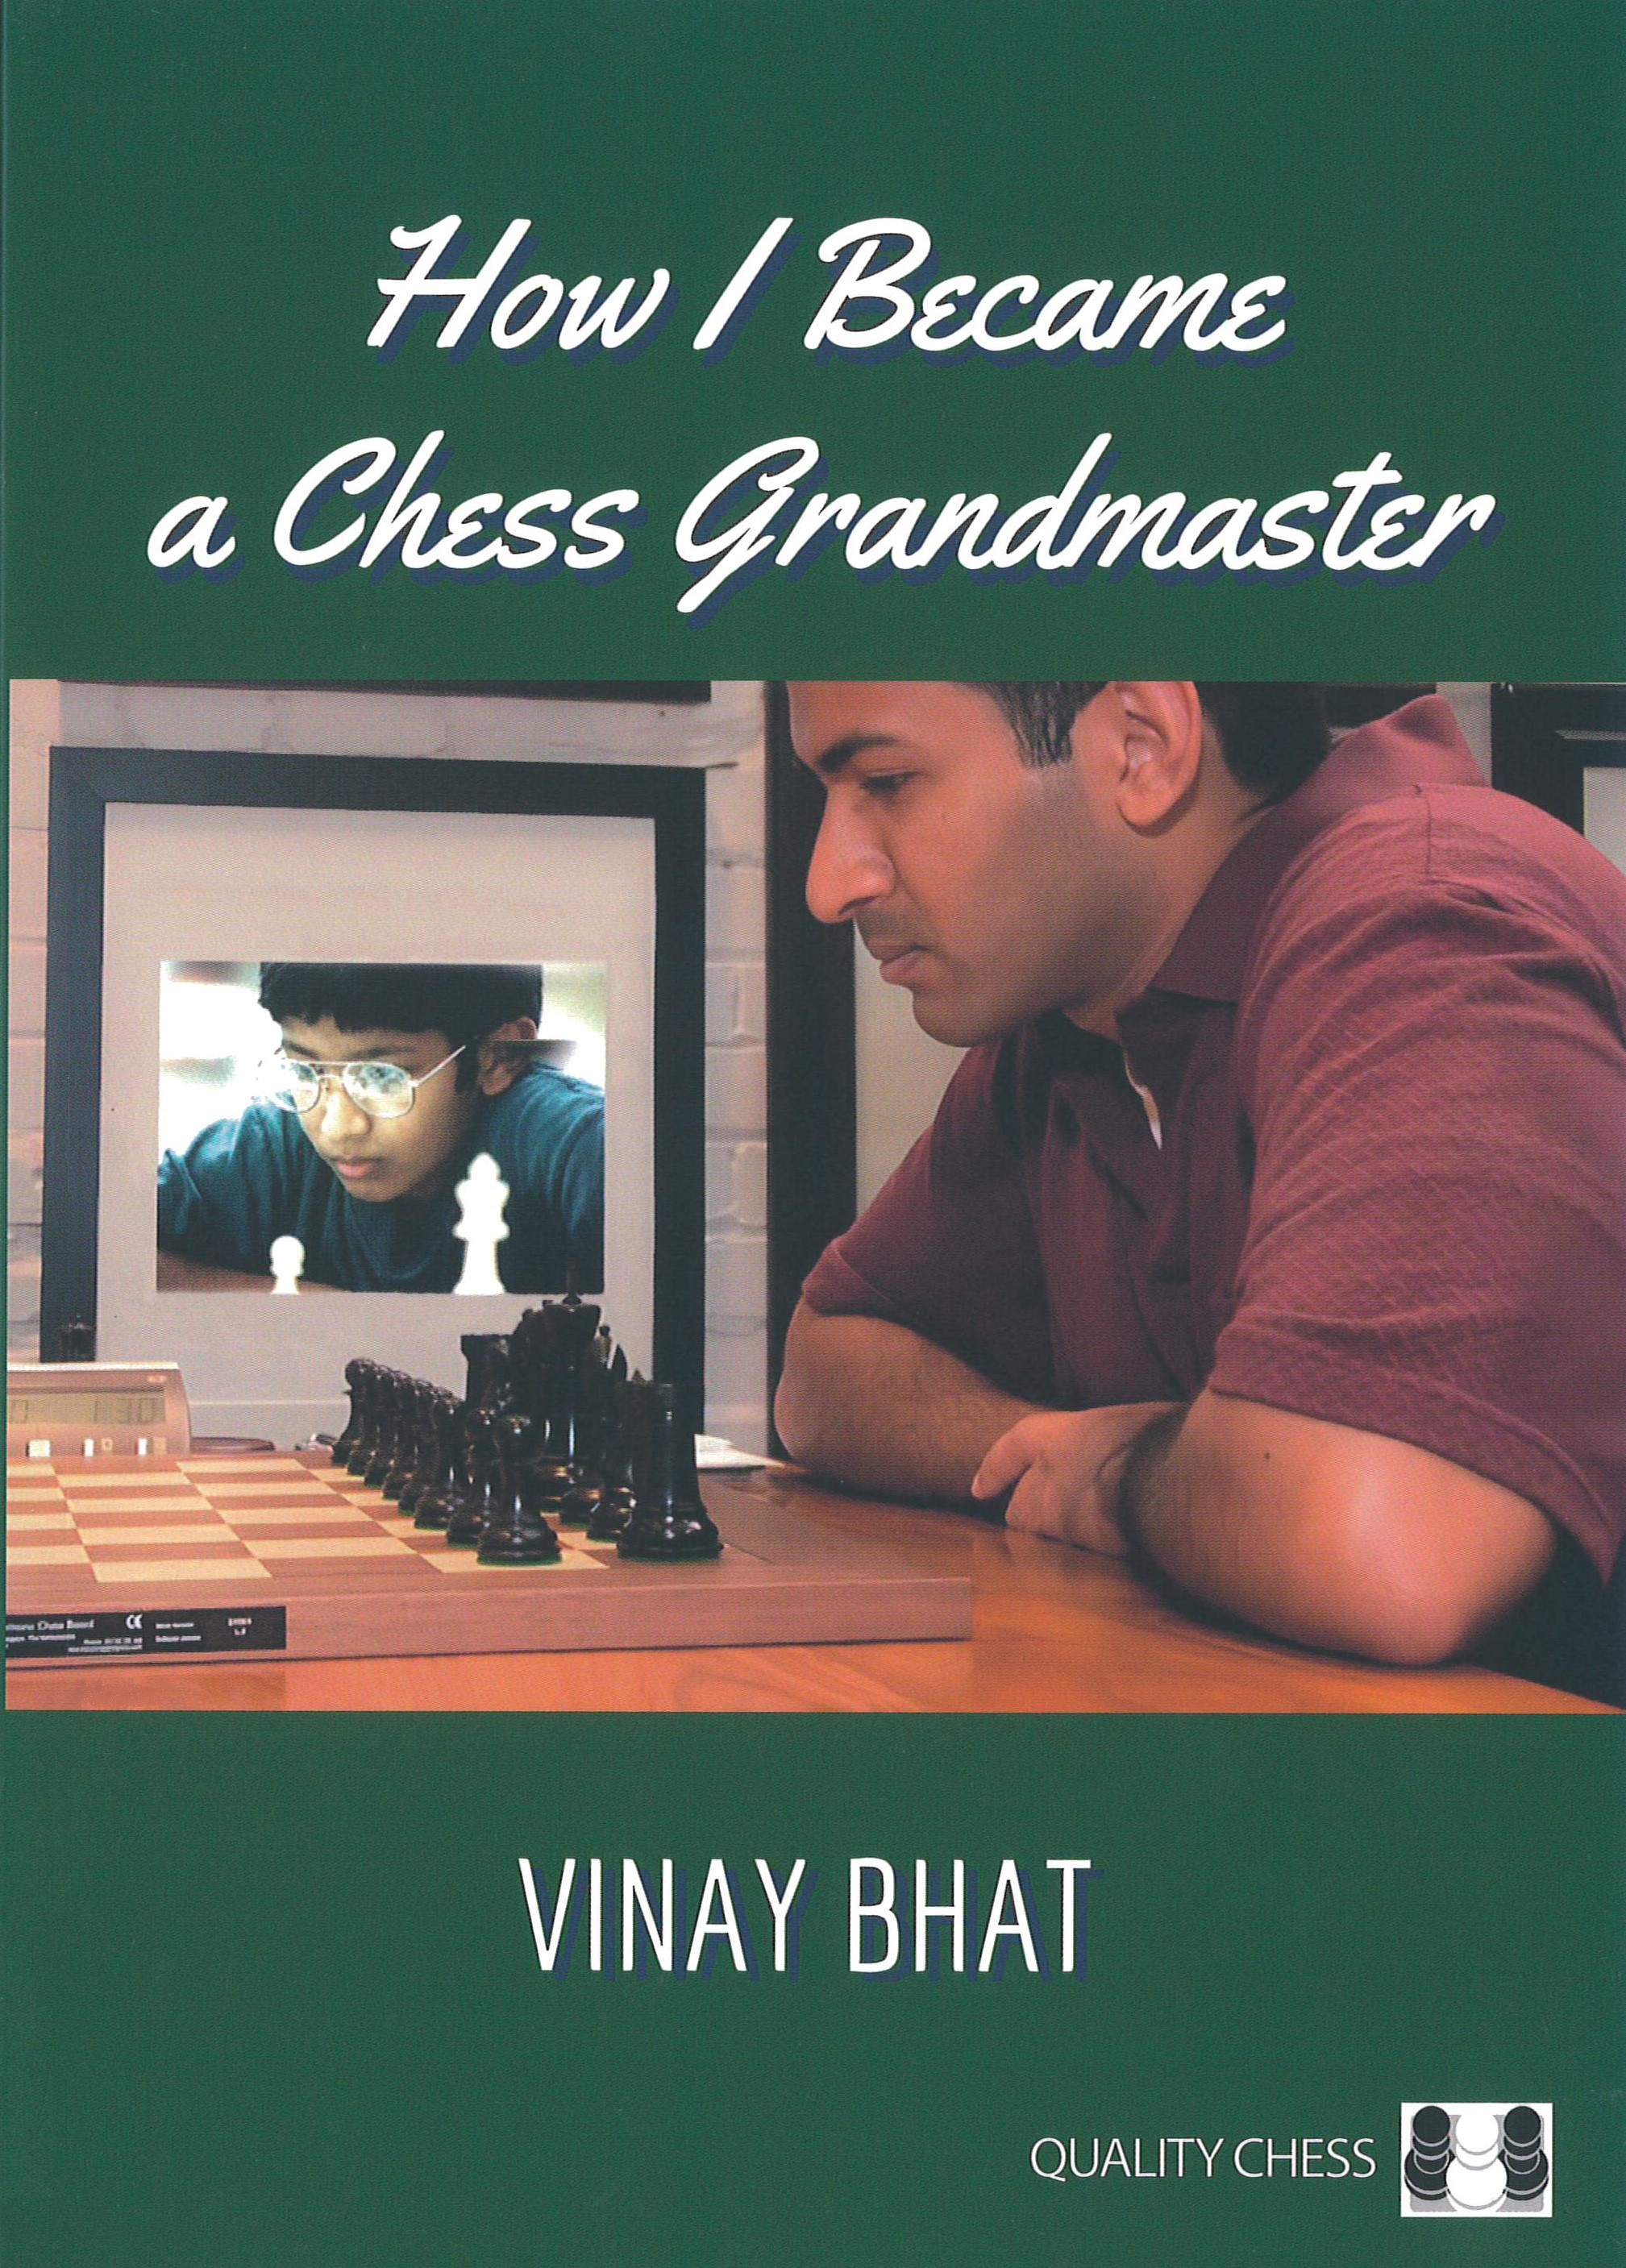 Bhat: How I Become a Chess Grandmaster